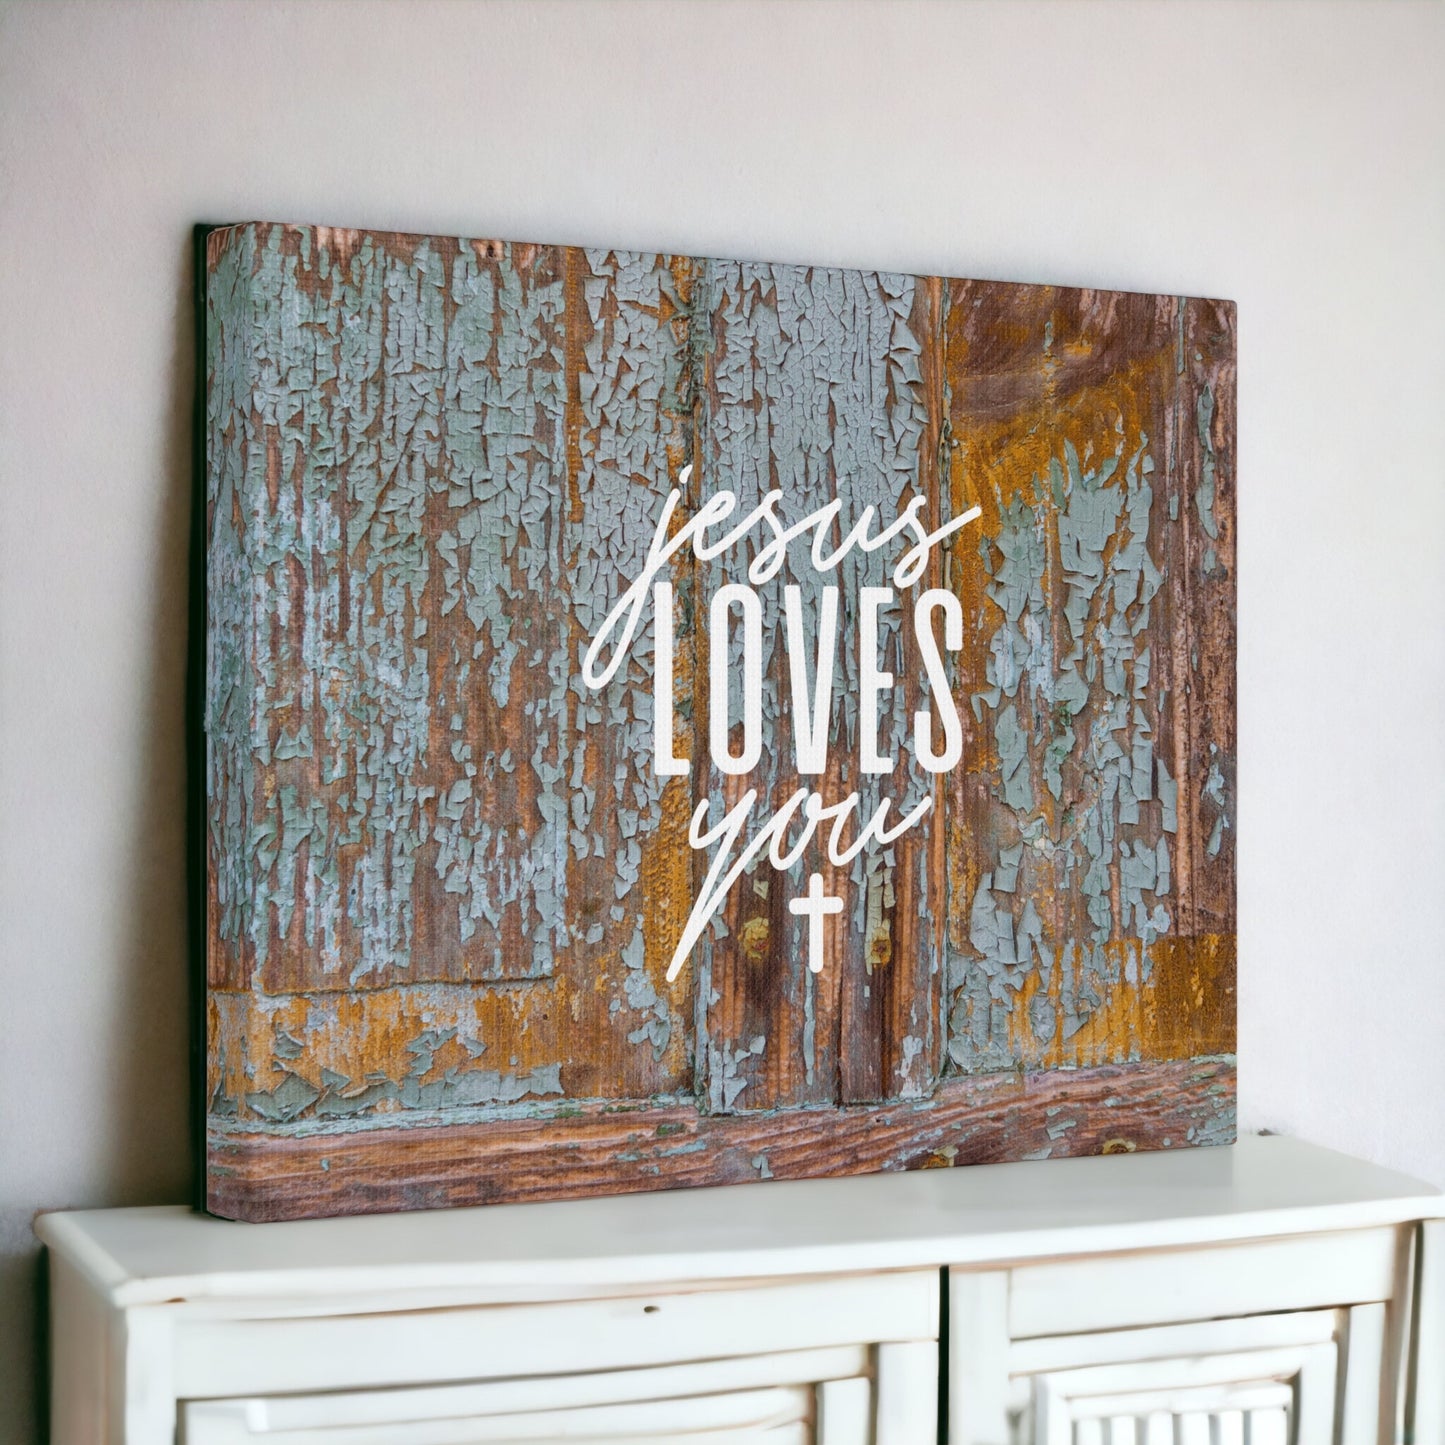 "Jesus Loves You" Wall Art - Weave Got Gifts - Unique Gifts You Won’t Find Anywhere Else!